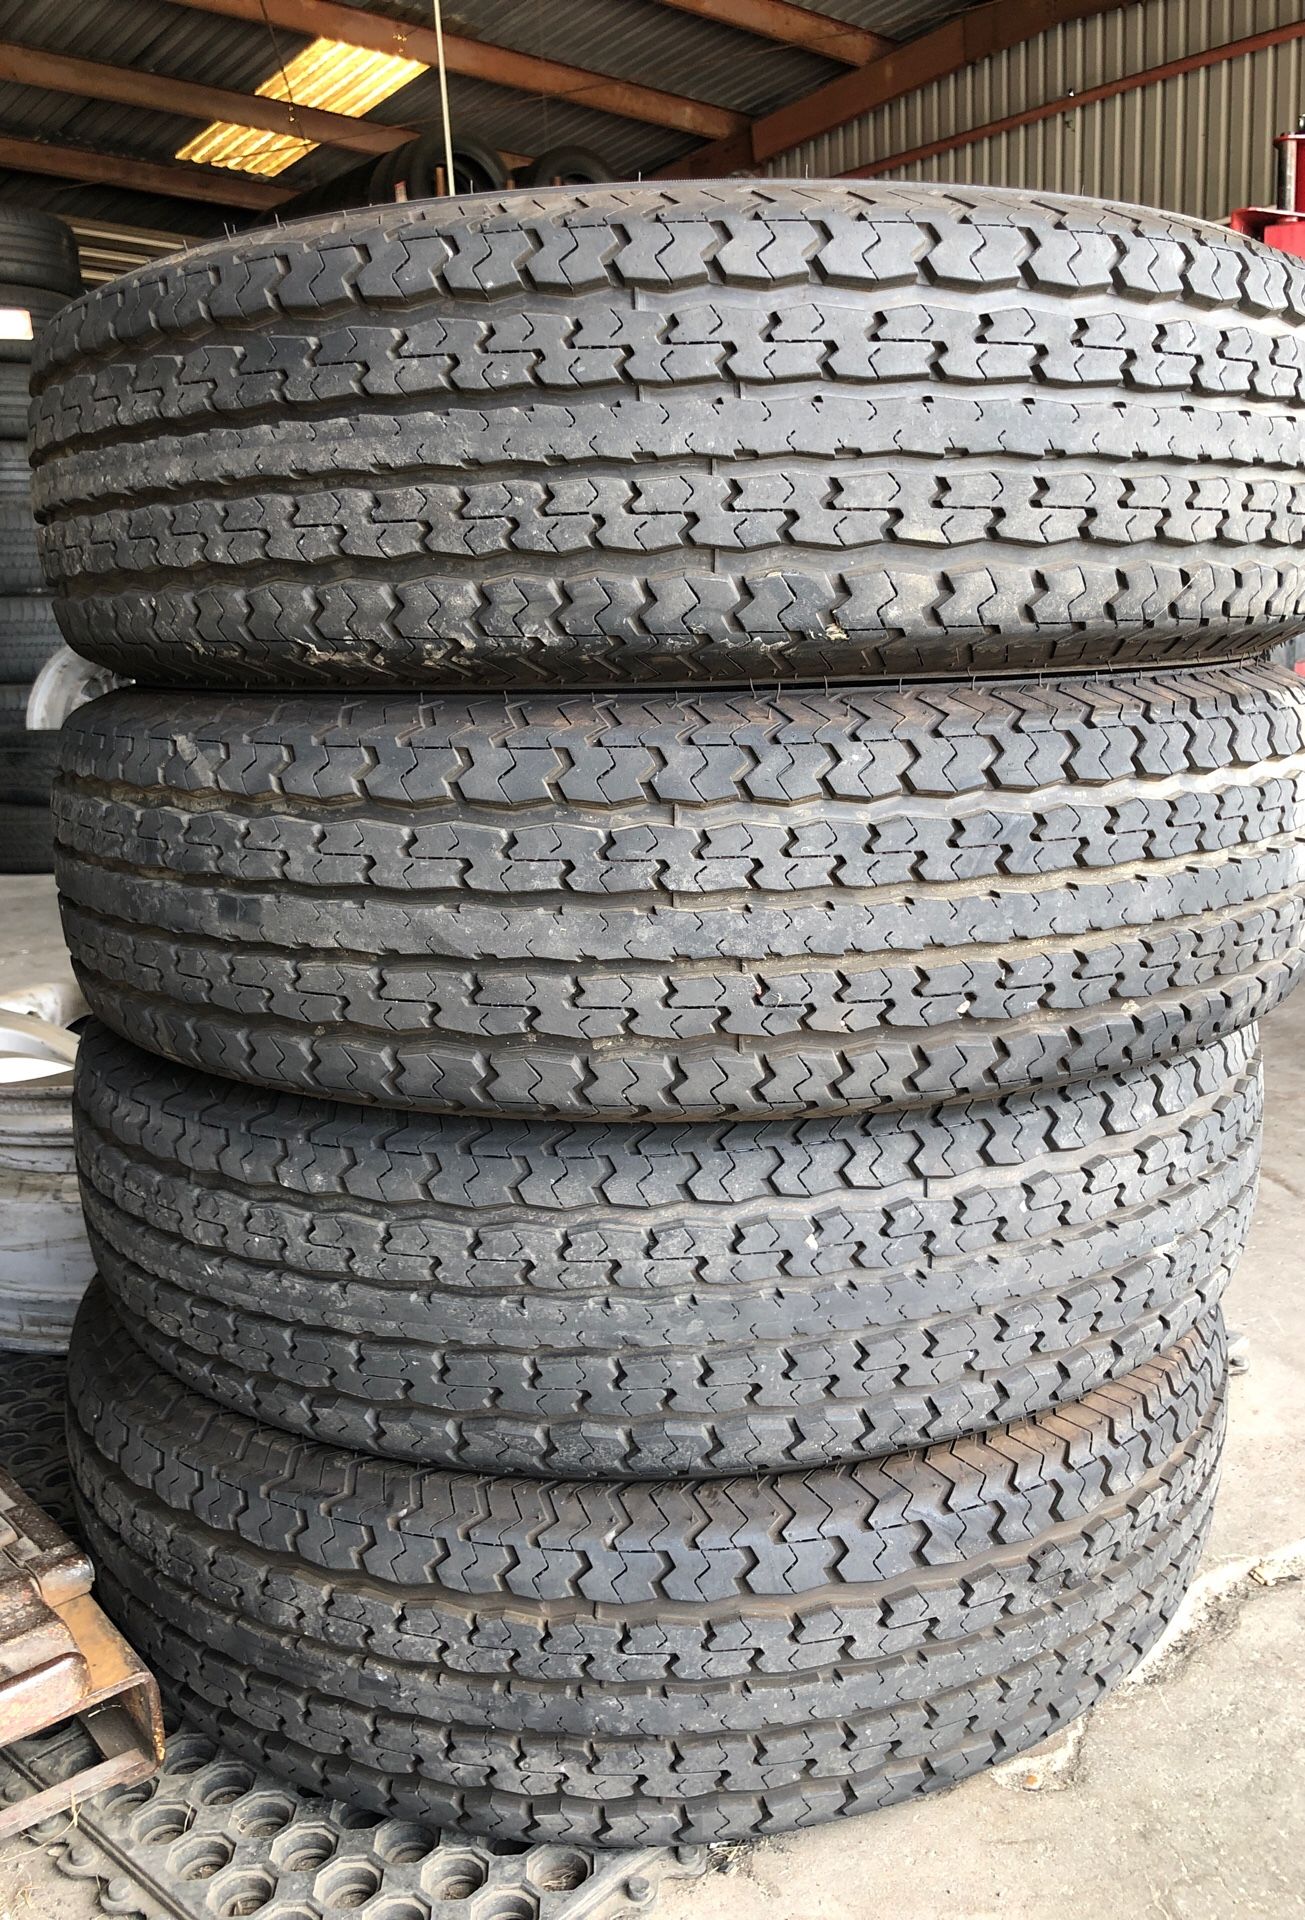 4 st 235/80/16 tow max 10 ply trailer tires